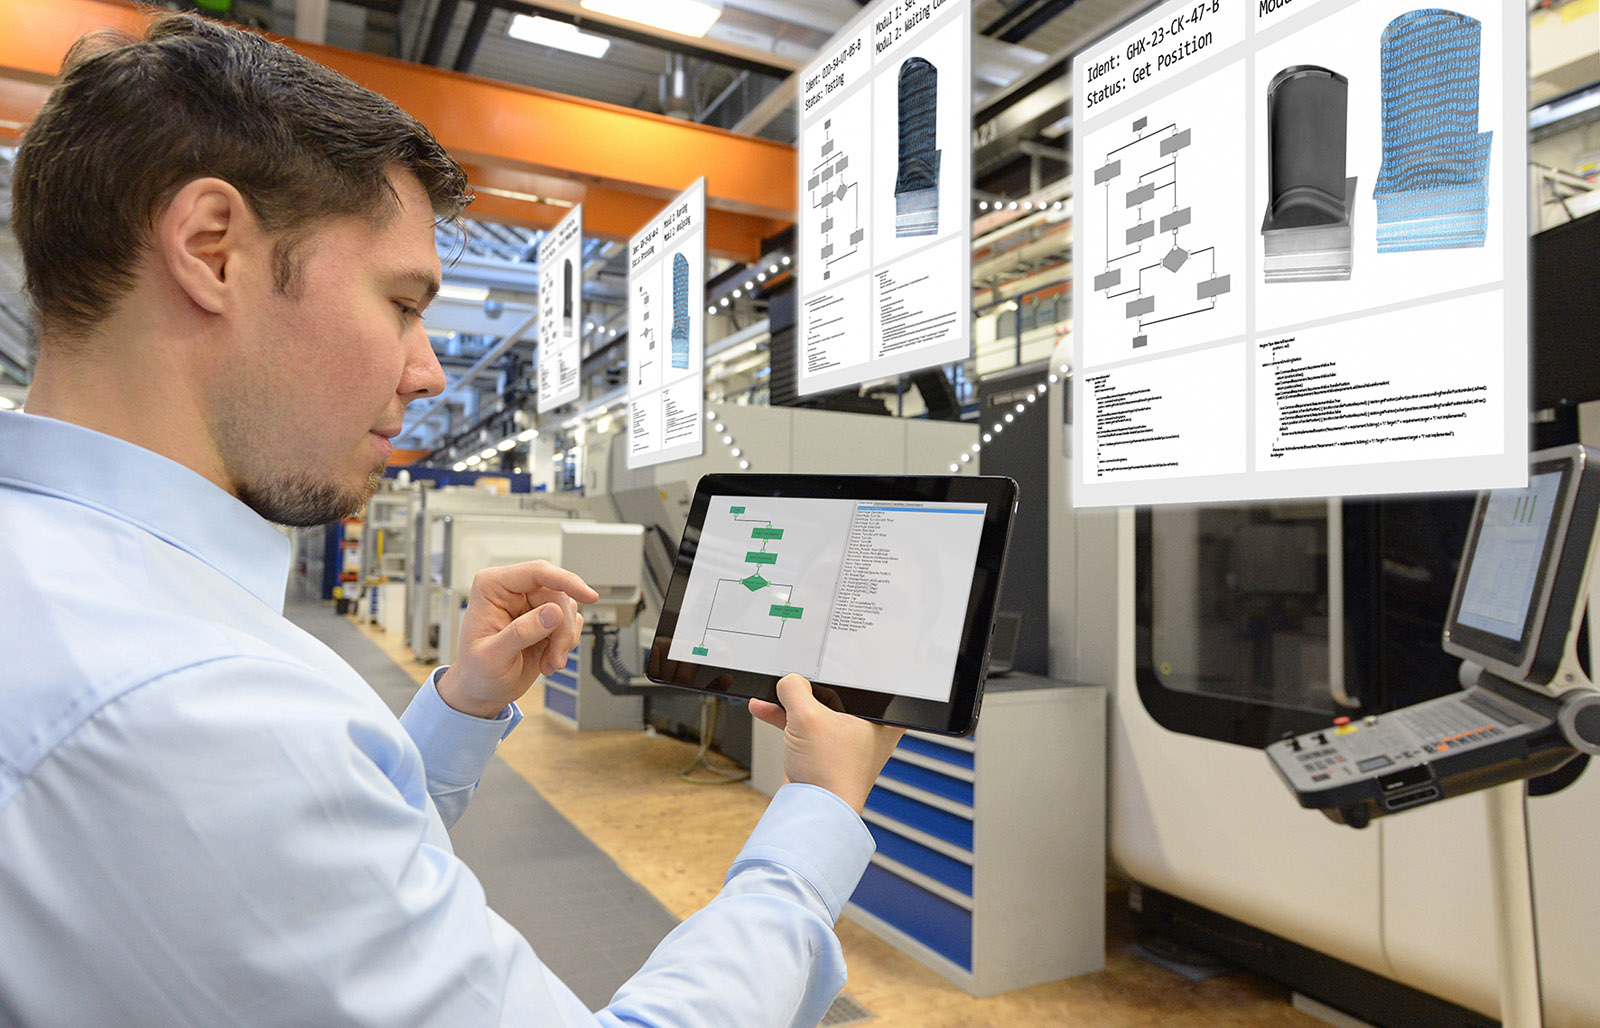 The smart manufacturing network serves as an enabler for connected, adaptive production processes.